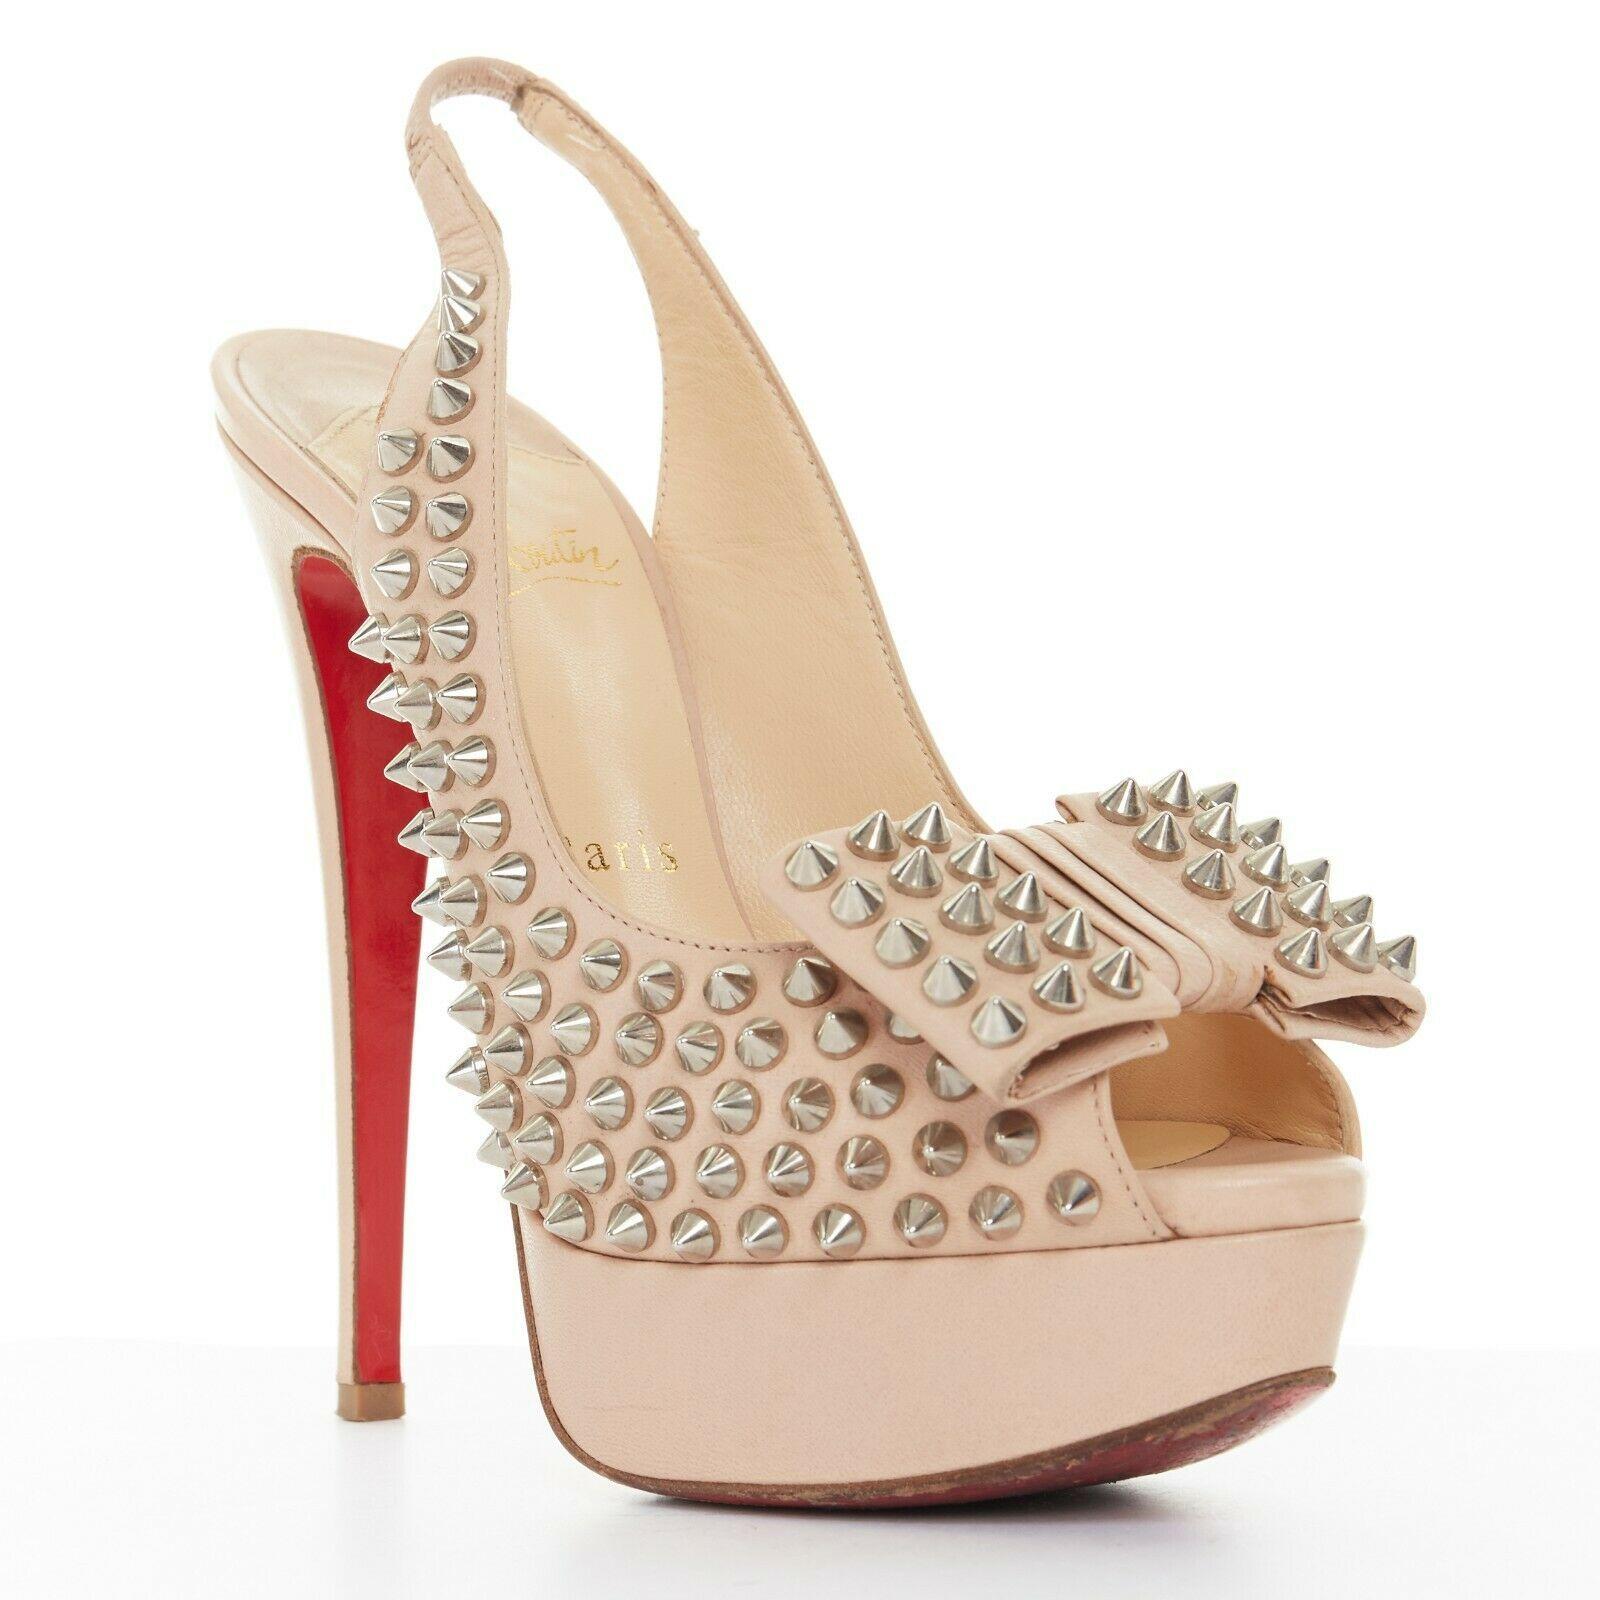 CHRISTIAN LOUBOUTIN Clou Noeud 150 nude spike stud bow peep toe platform EU36
CHRISTIAN LOUBOUTIN
Clou Noued 150. Nude leather upper. 
Silver-tone hardware. Spike stud all-over embellishment. Origami flat bow detail at toe. 
Peep toe. Platform sole.